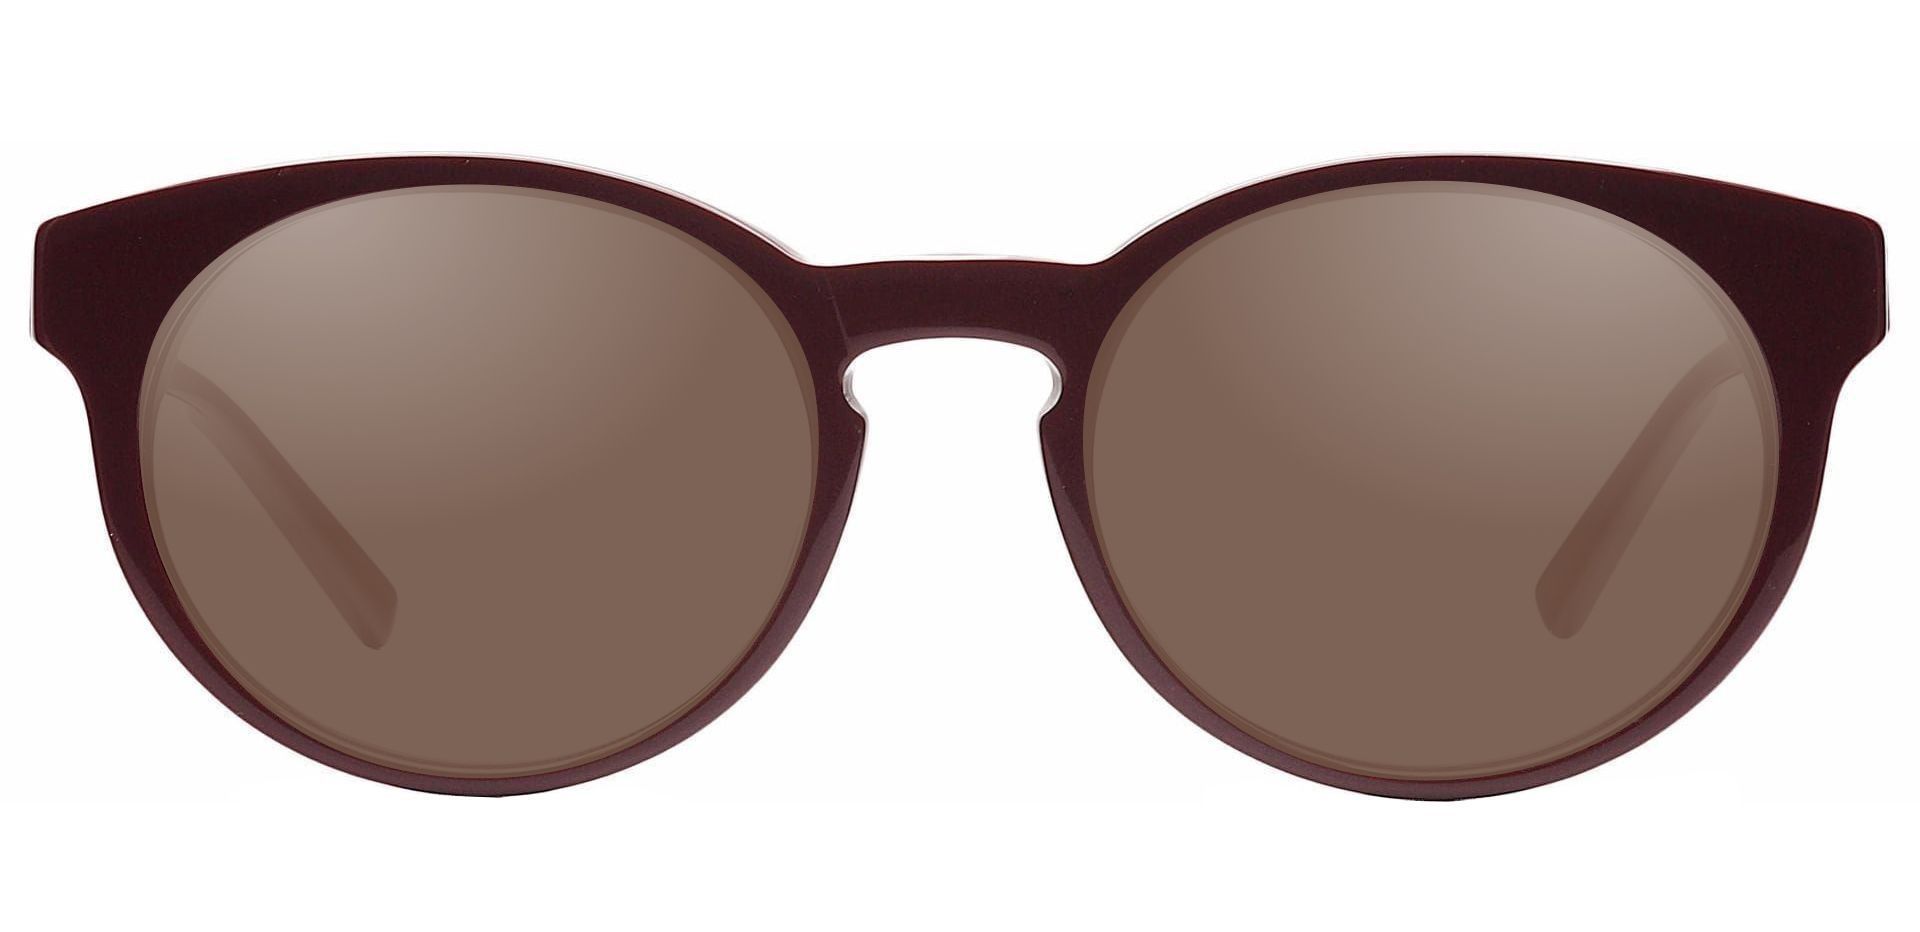 Spright Round Prescription Sunglasses -  Brown Frame With Brown Lenses